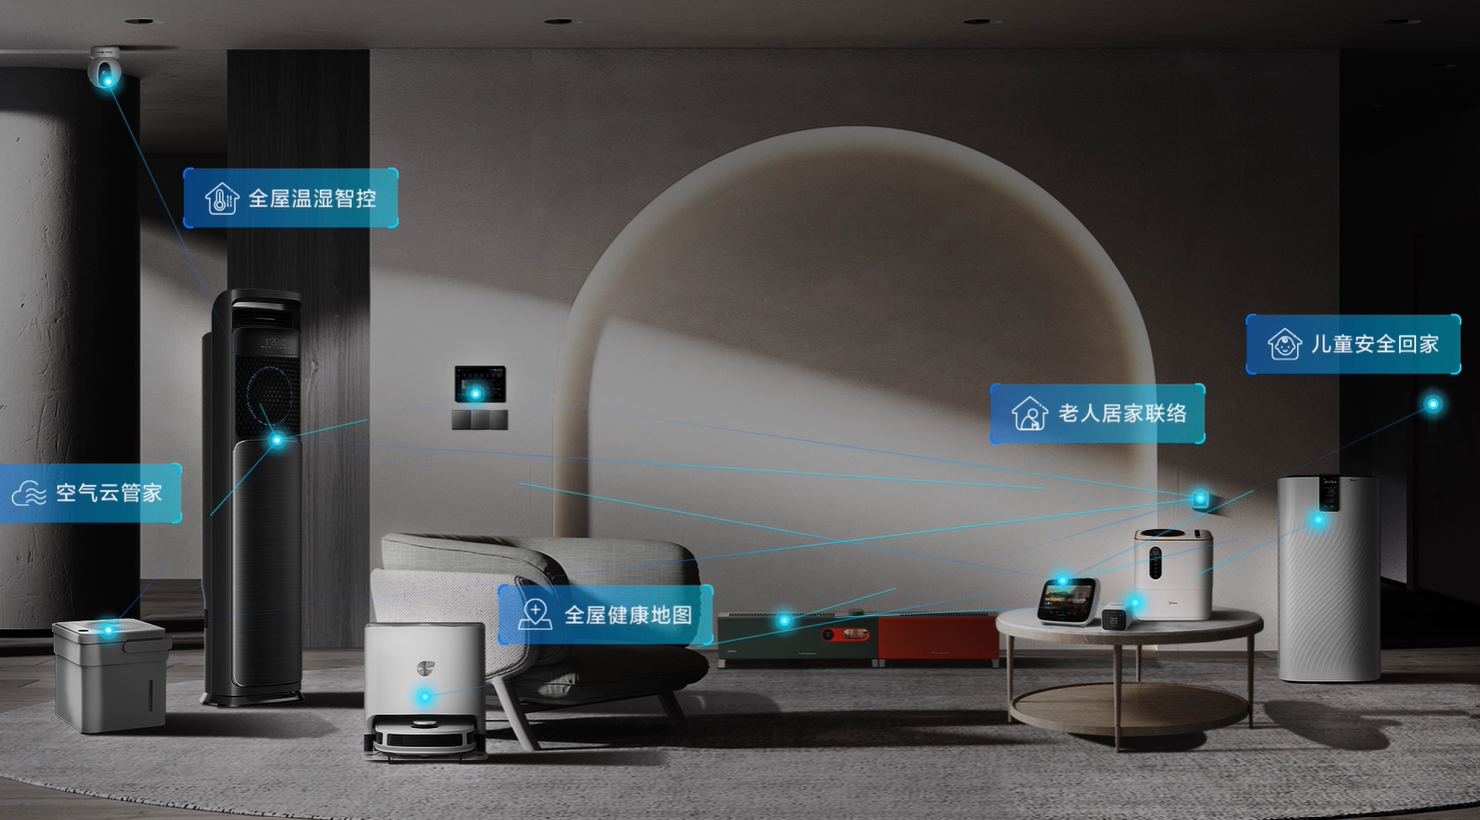 Massive Hong Kong IPO for World’s Largest Home Appliance Company